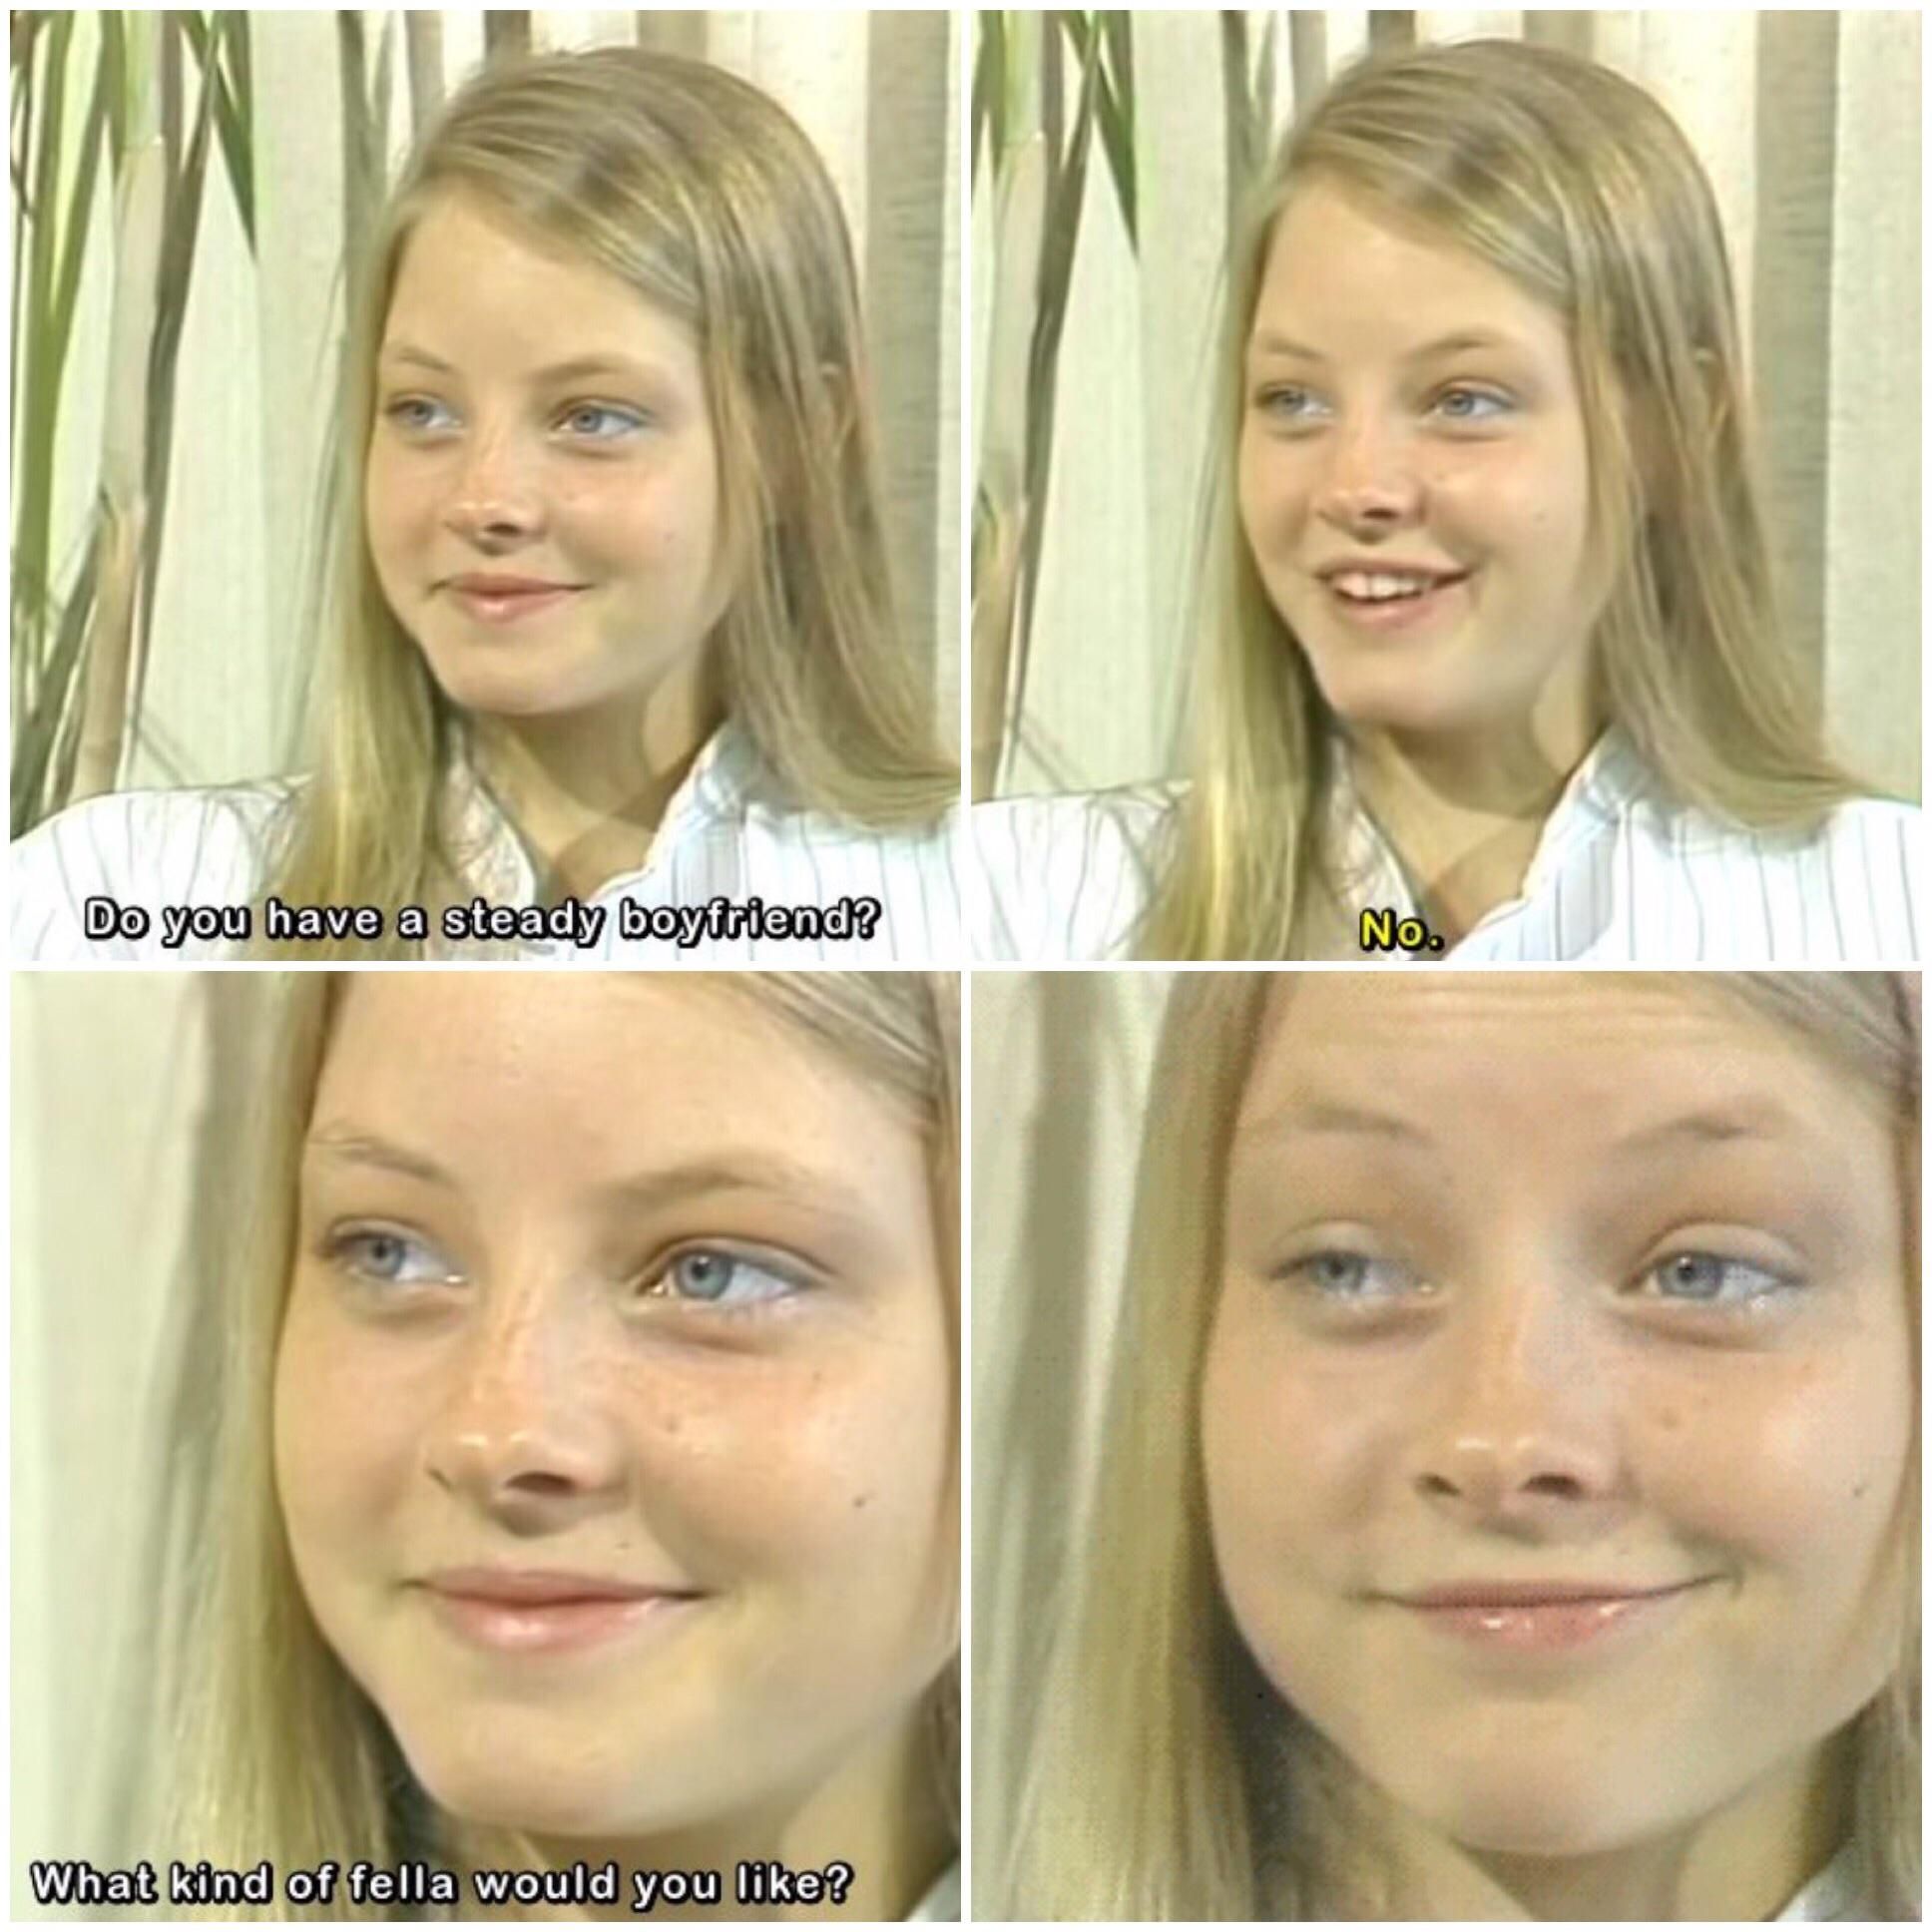 Jodi Foster being asked about boys in 1979